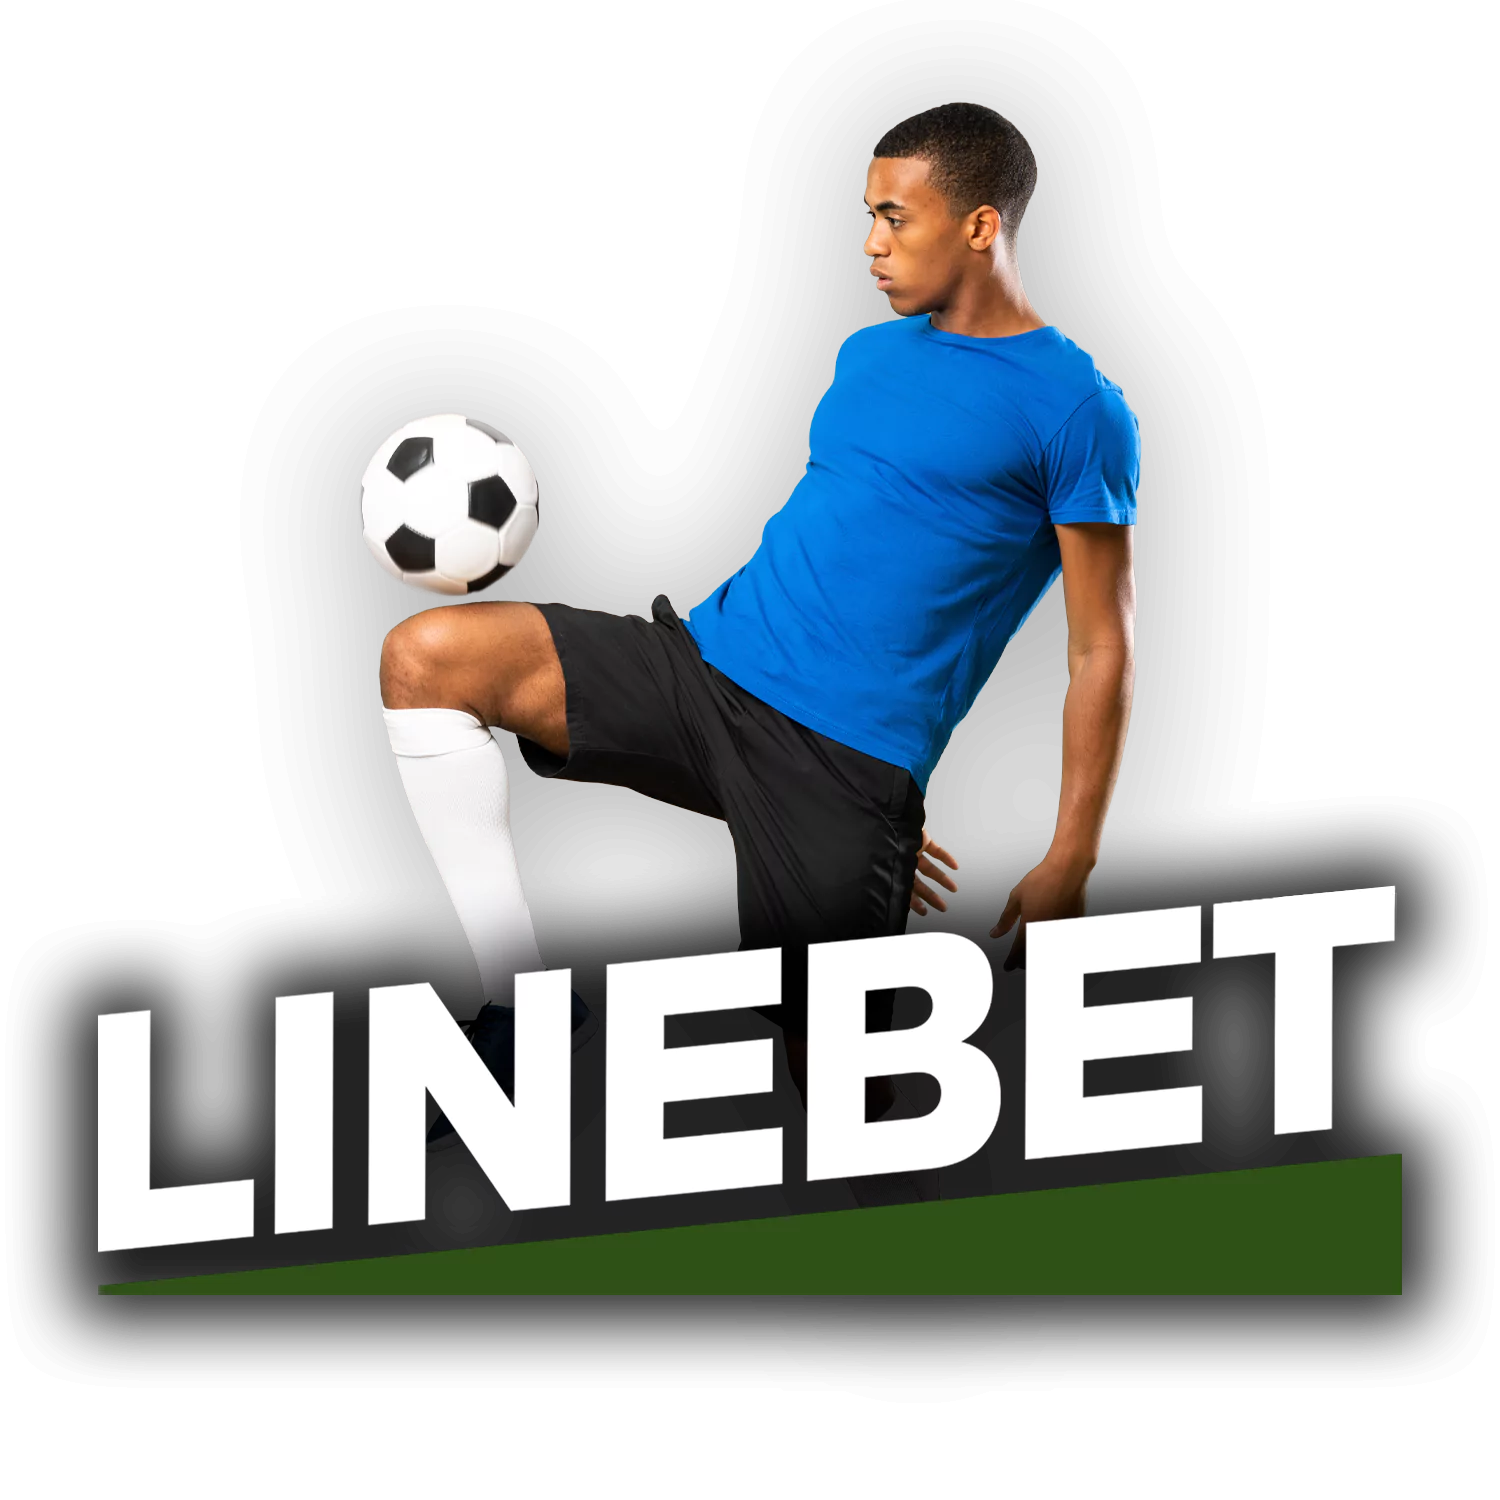 Learn more about football betting on Linebet.